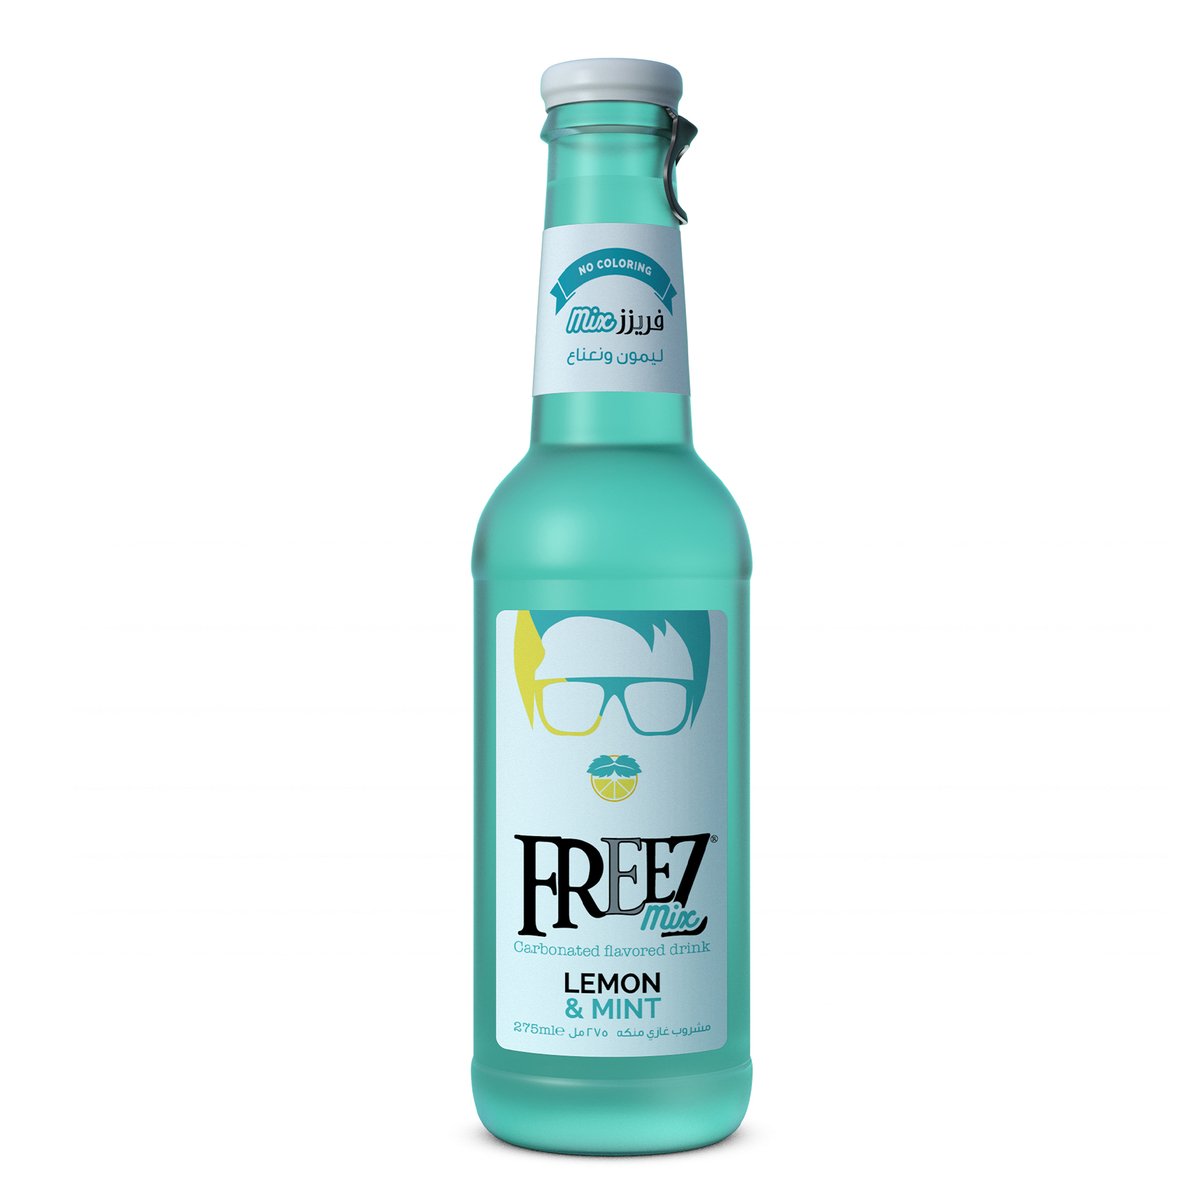 Buy Freez Mix Lemon & Mint Carbonated Flavored Drink 275 ml Online at Best Price | Cola Bottle | Lulu Egypt in Egypt